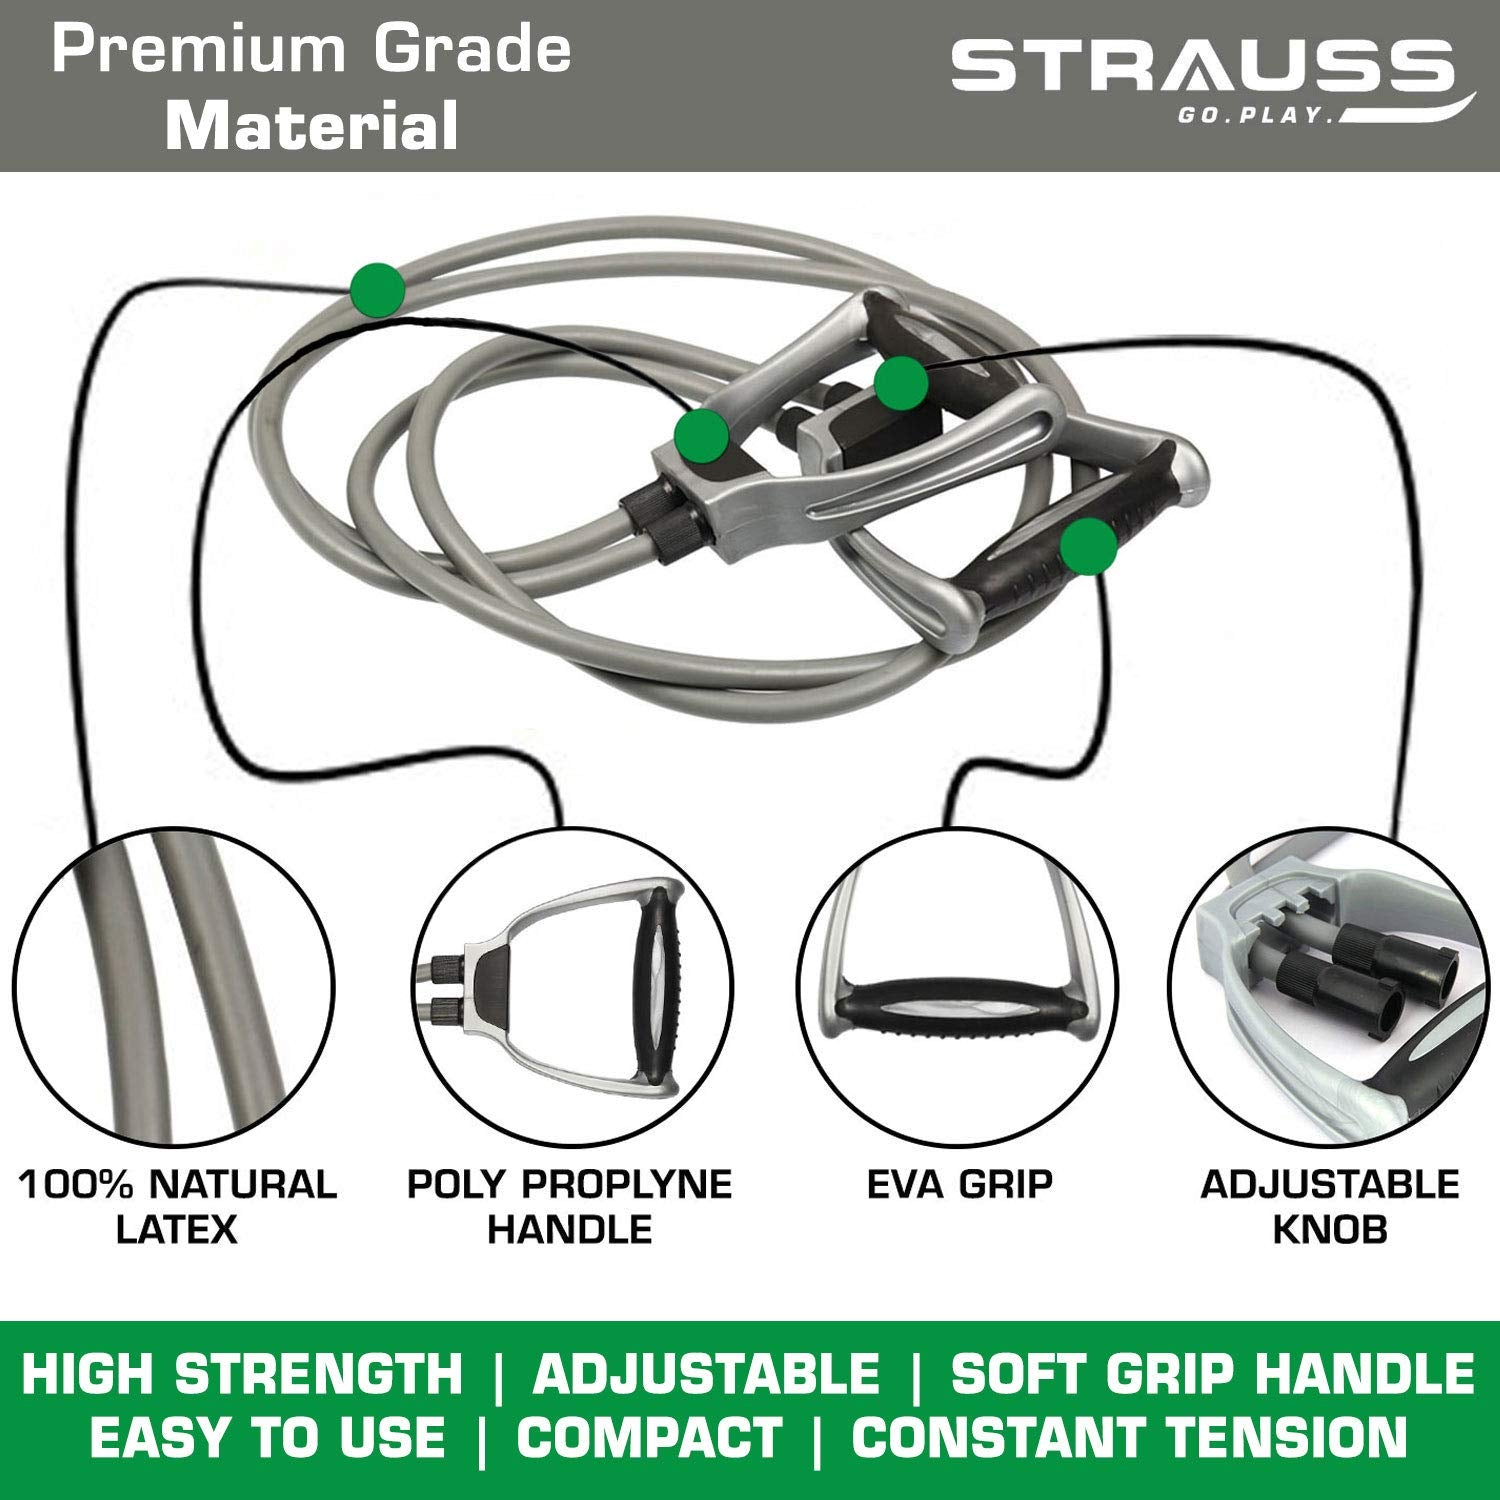 Strauss Double Toning Tube, (Grey) With Skipping Rope